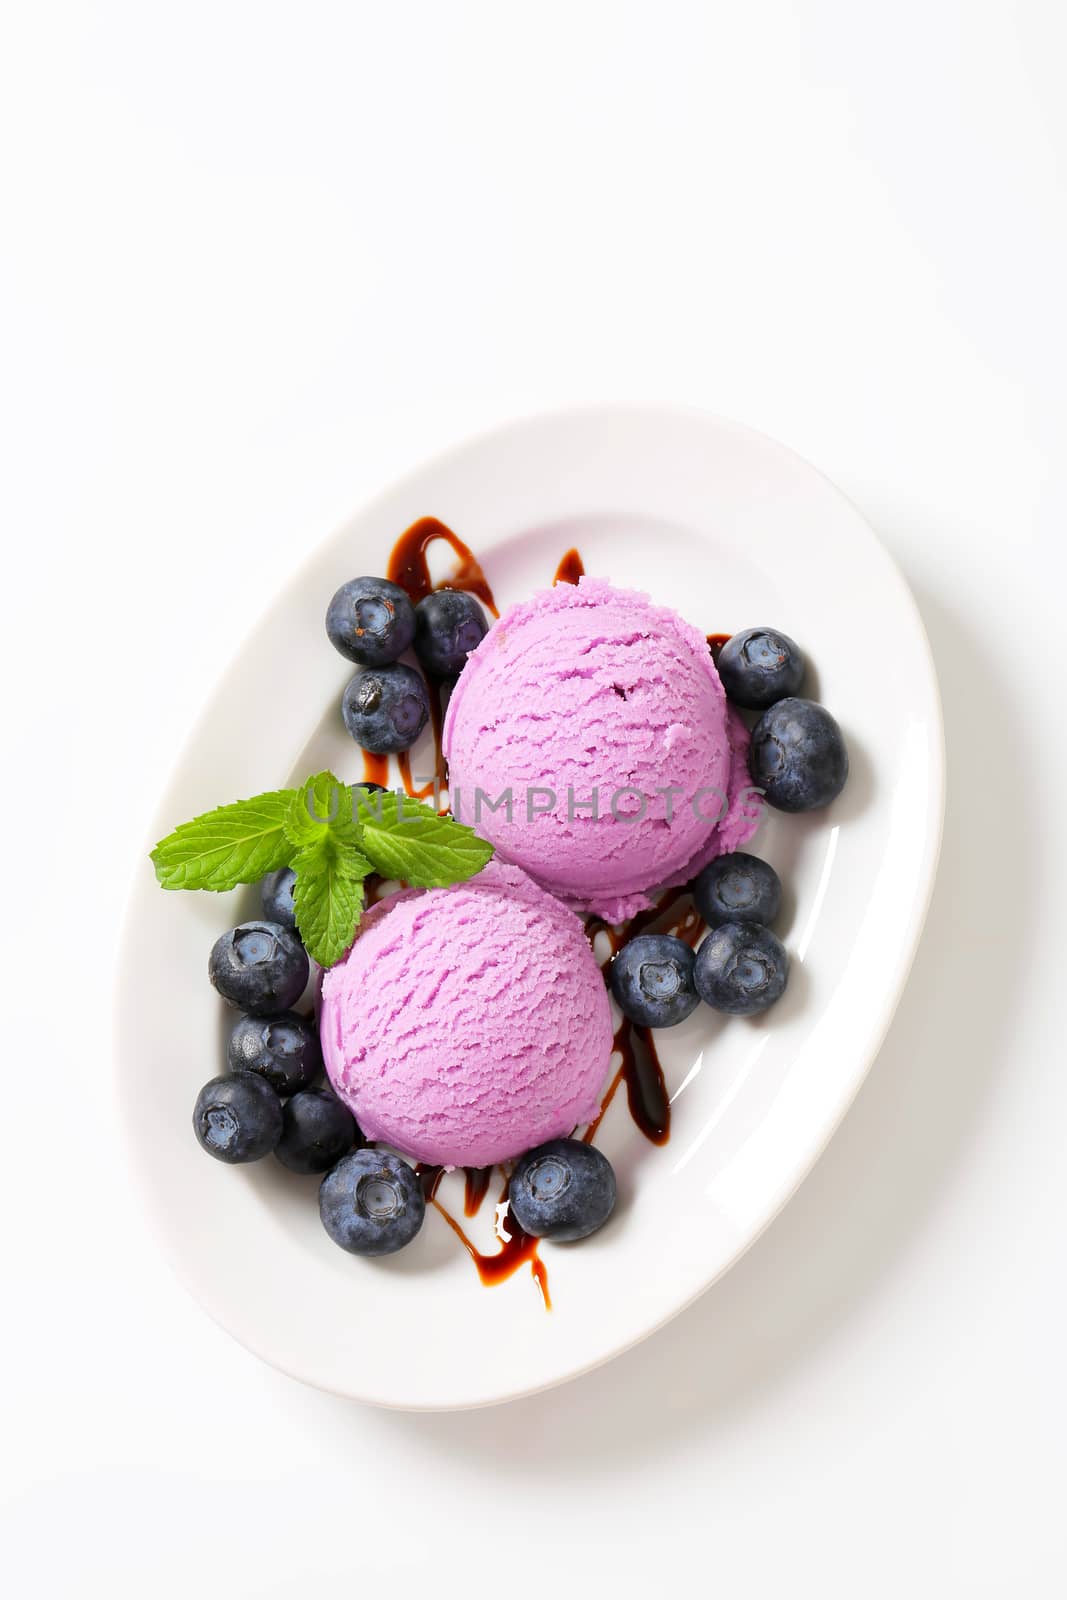 Blueberry ice cream and fruit by Digifoodstock